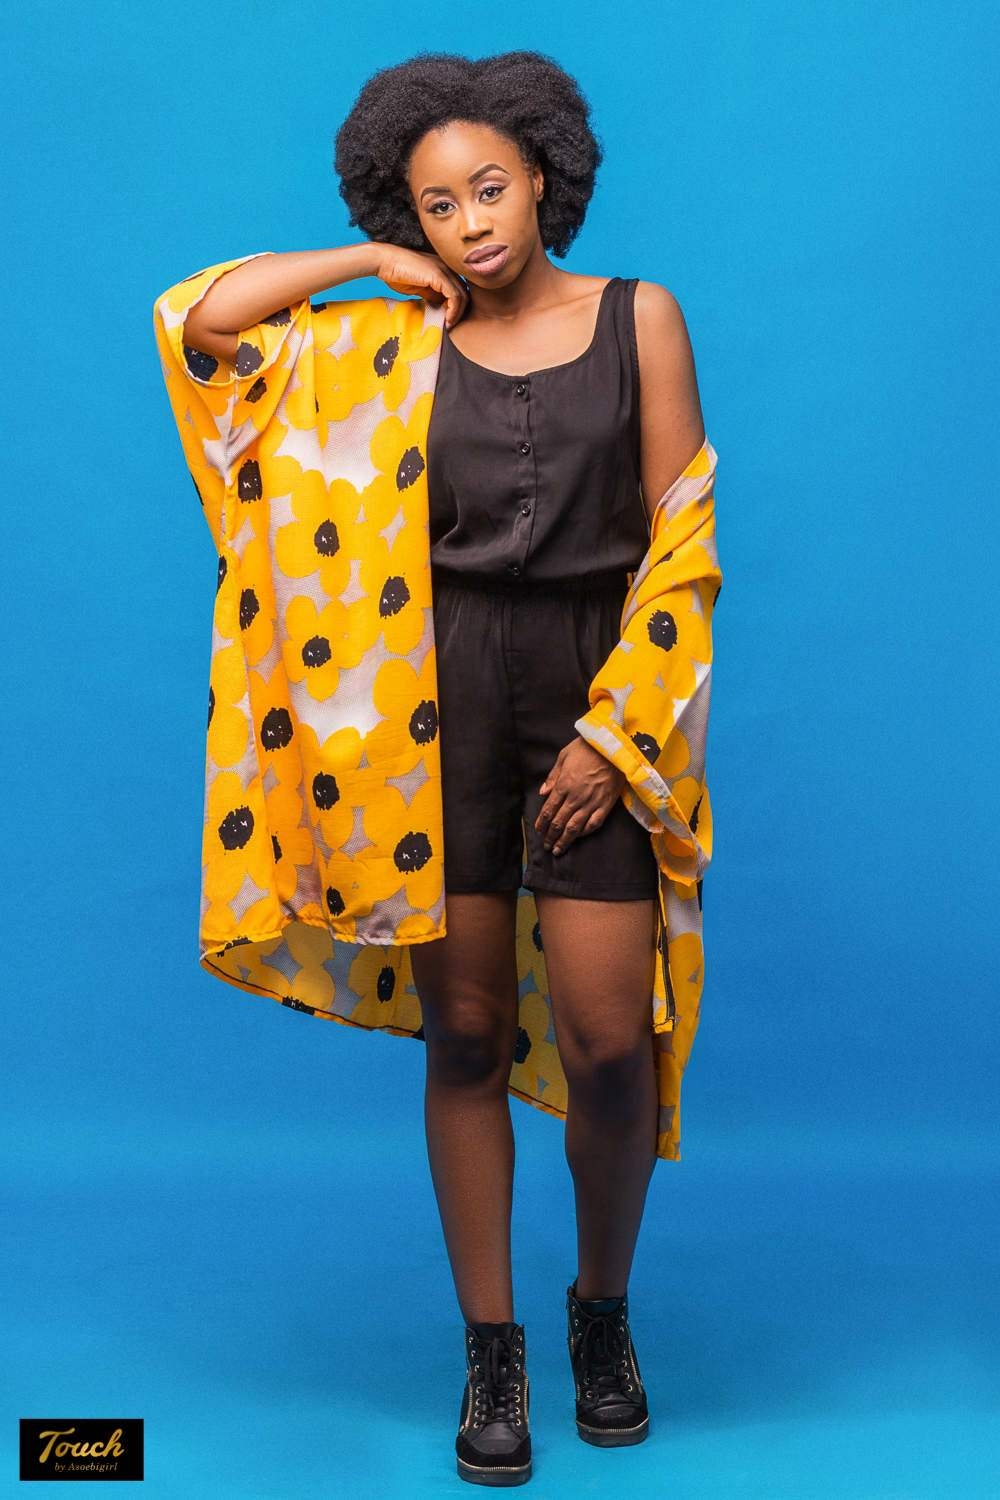 Touch By Asoebigirl Releases New Lookbook Featuring Arese Emokpae Titled “The Touch Woman”